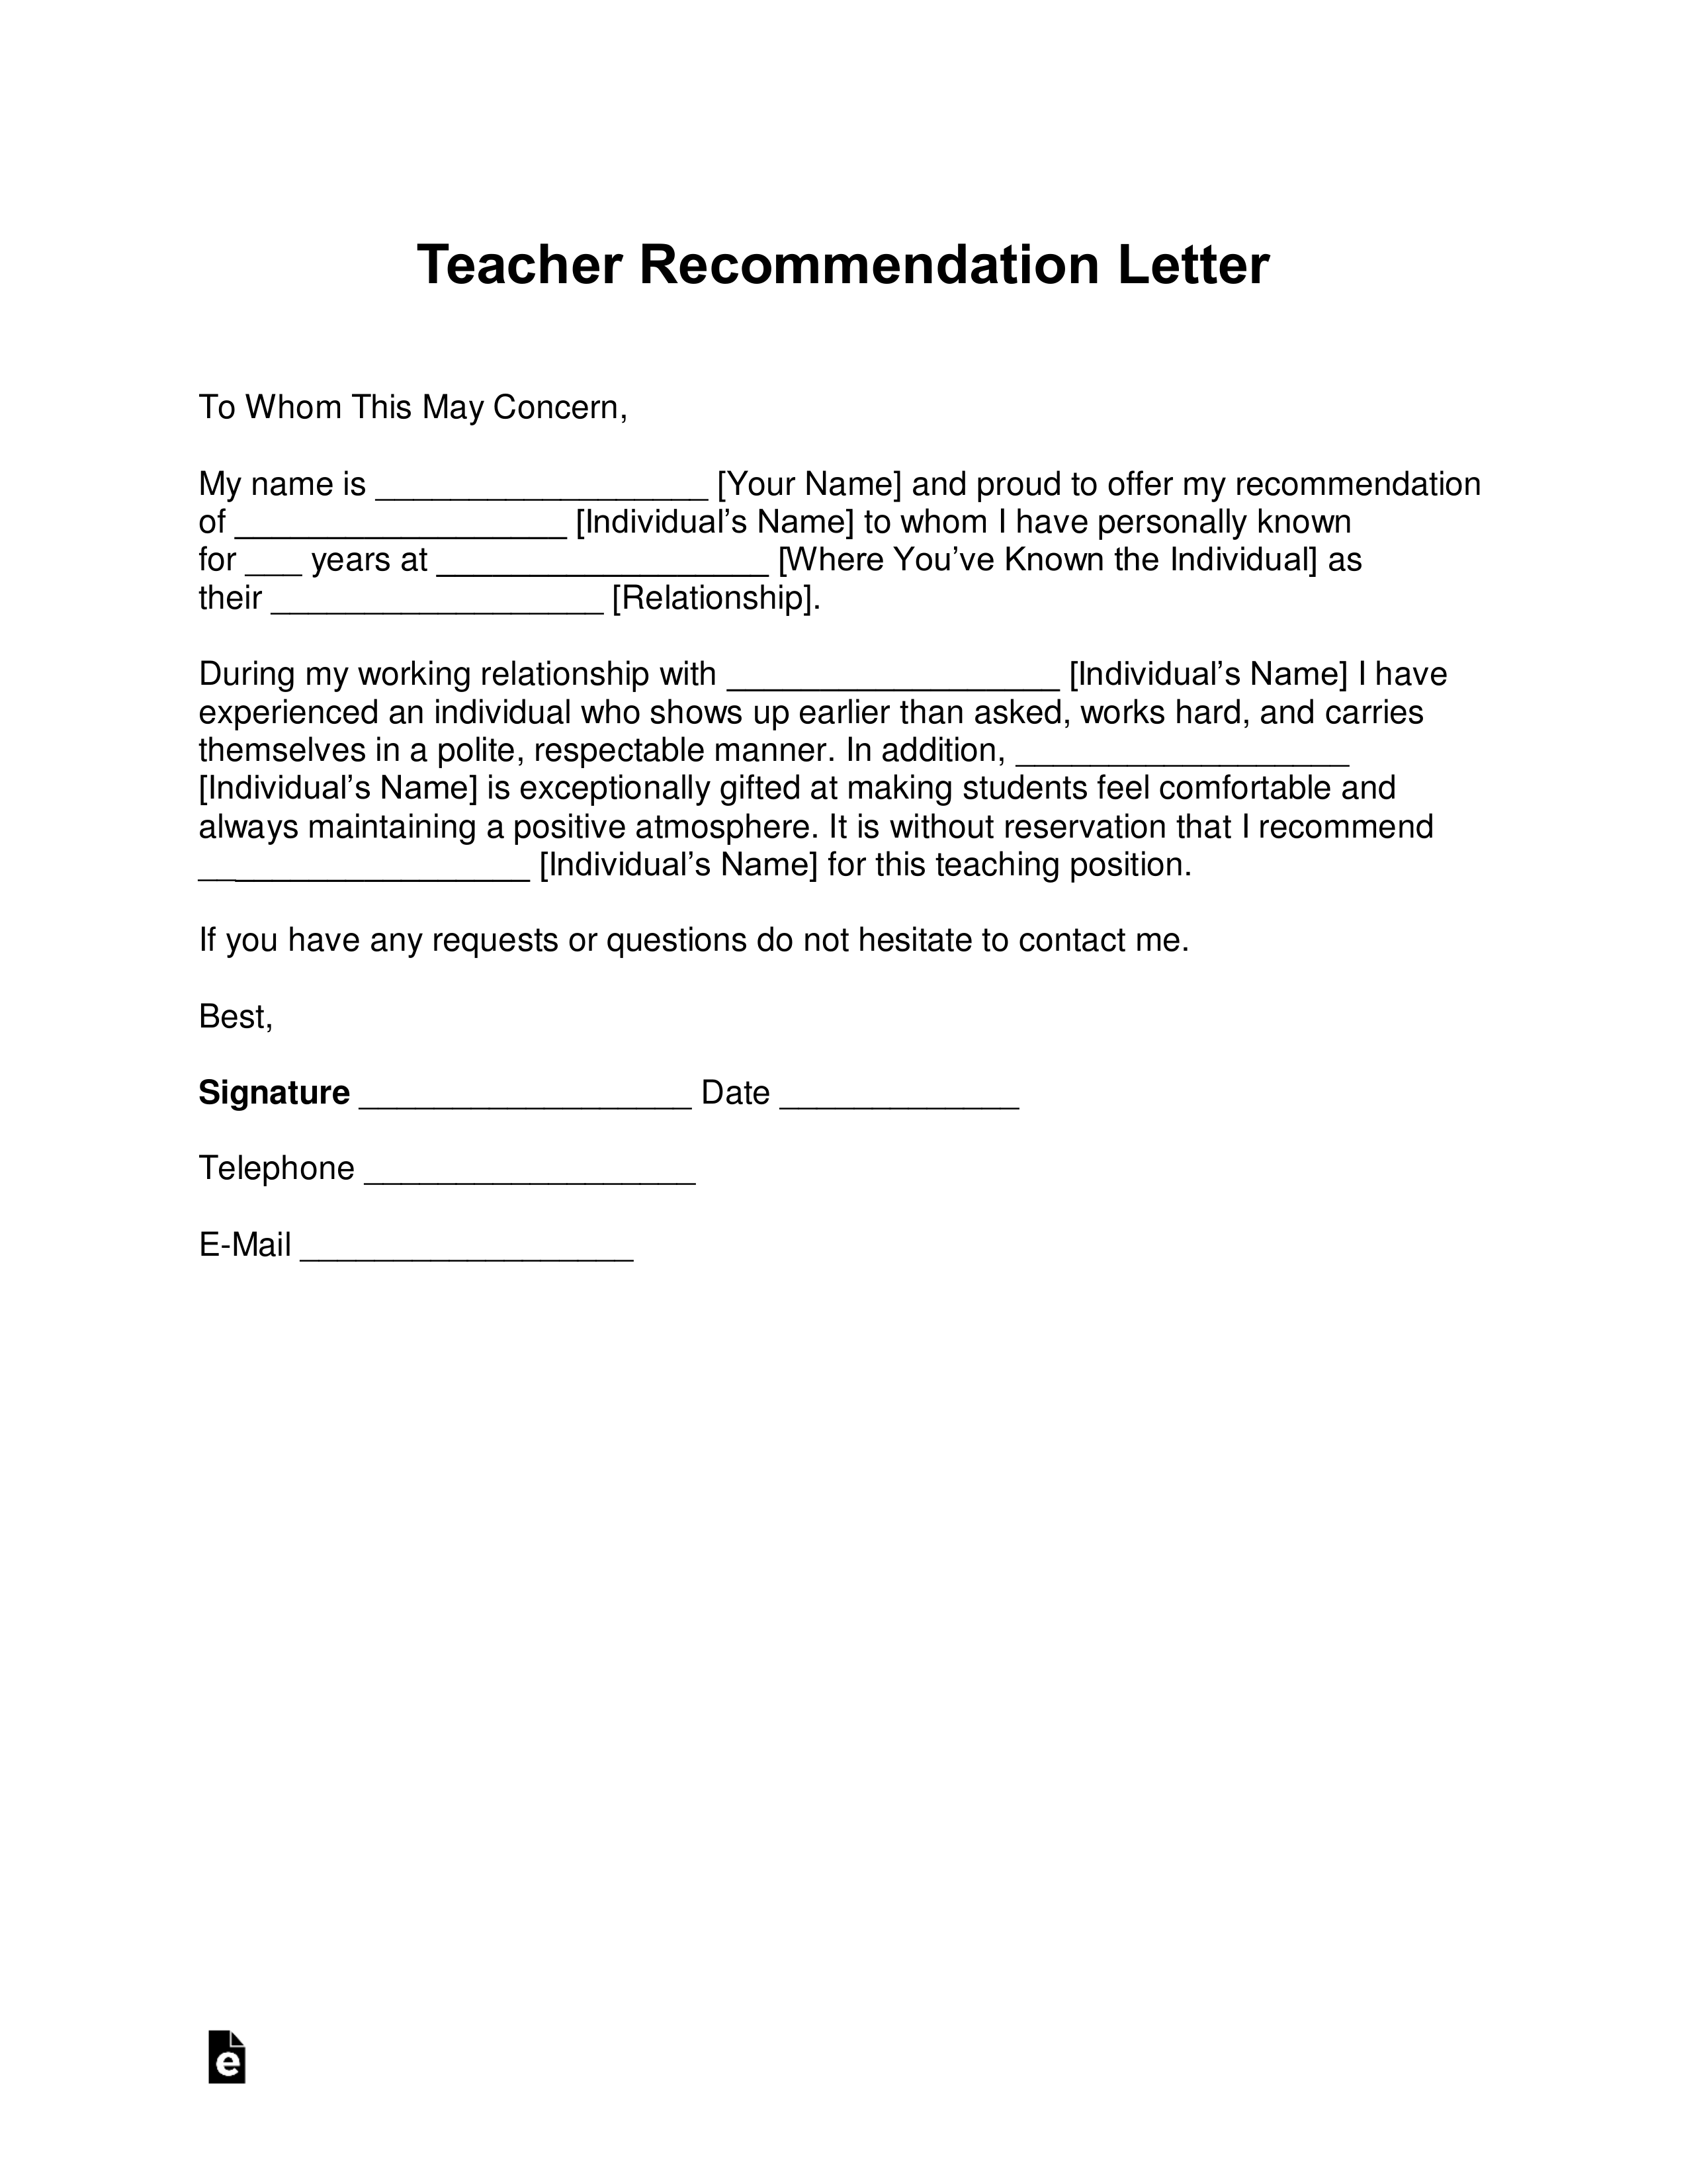 Reference Letter Examples For Teachers from eforms.com